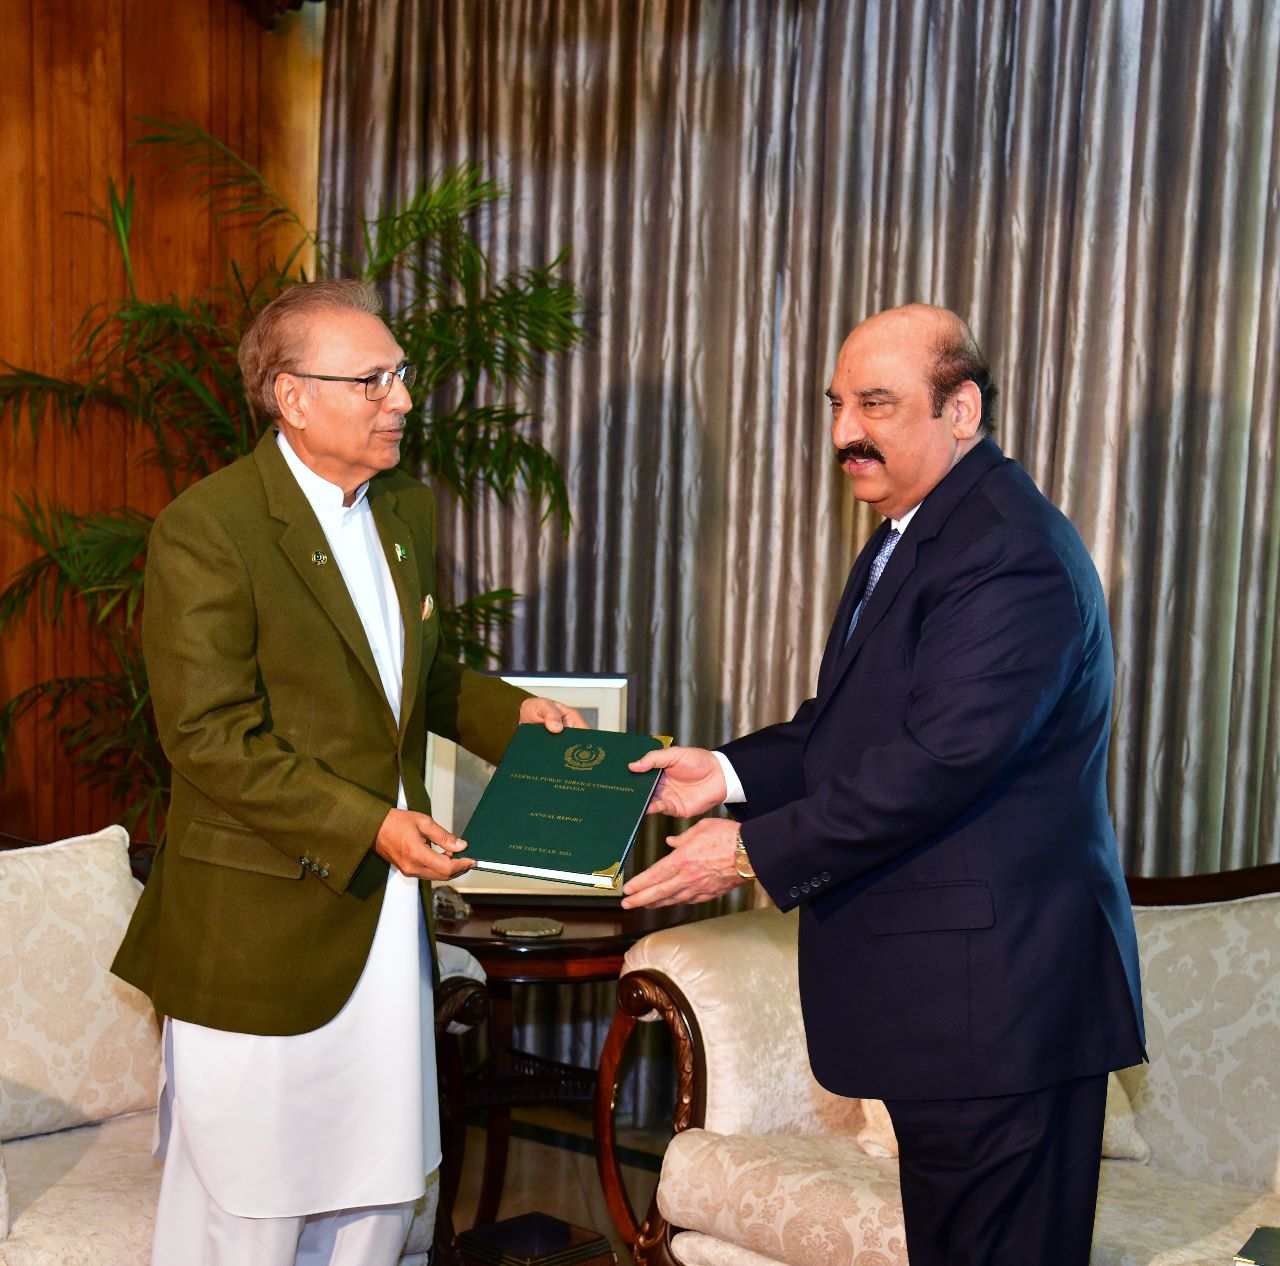 President stresses quality improvement in civil service with ‘right person for right job’